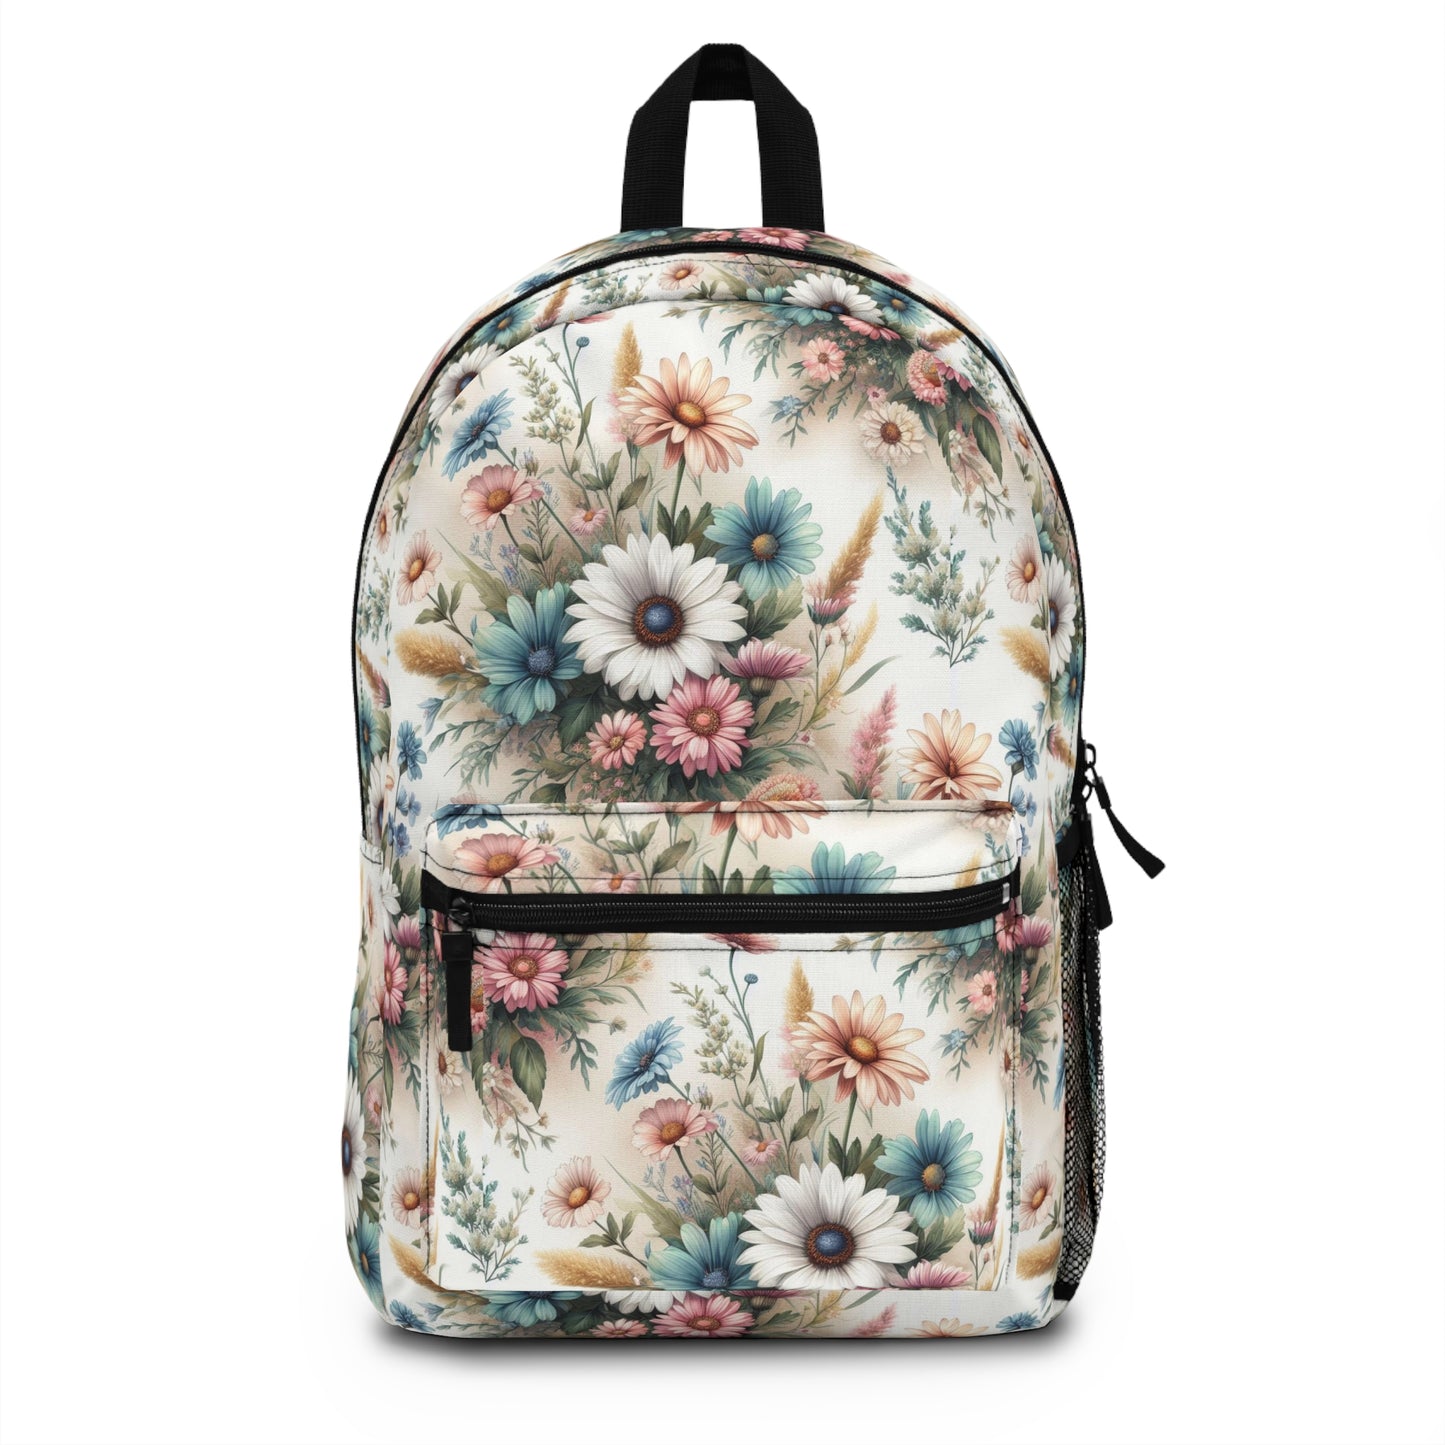 white,, pink and blue daisy backpack